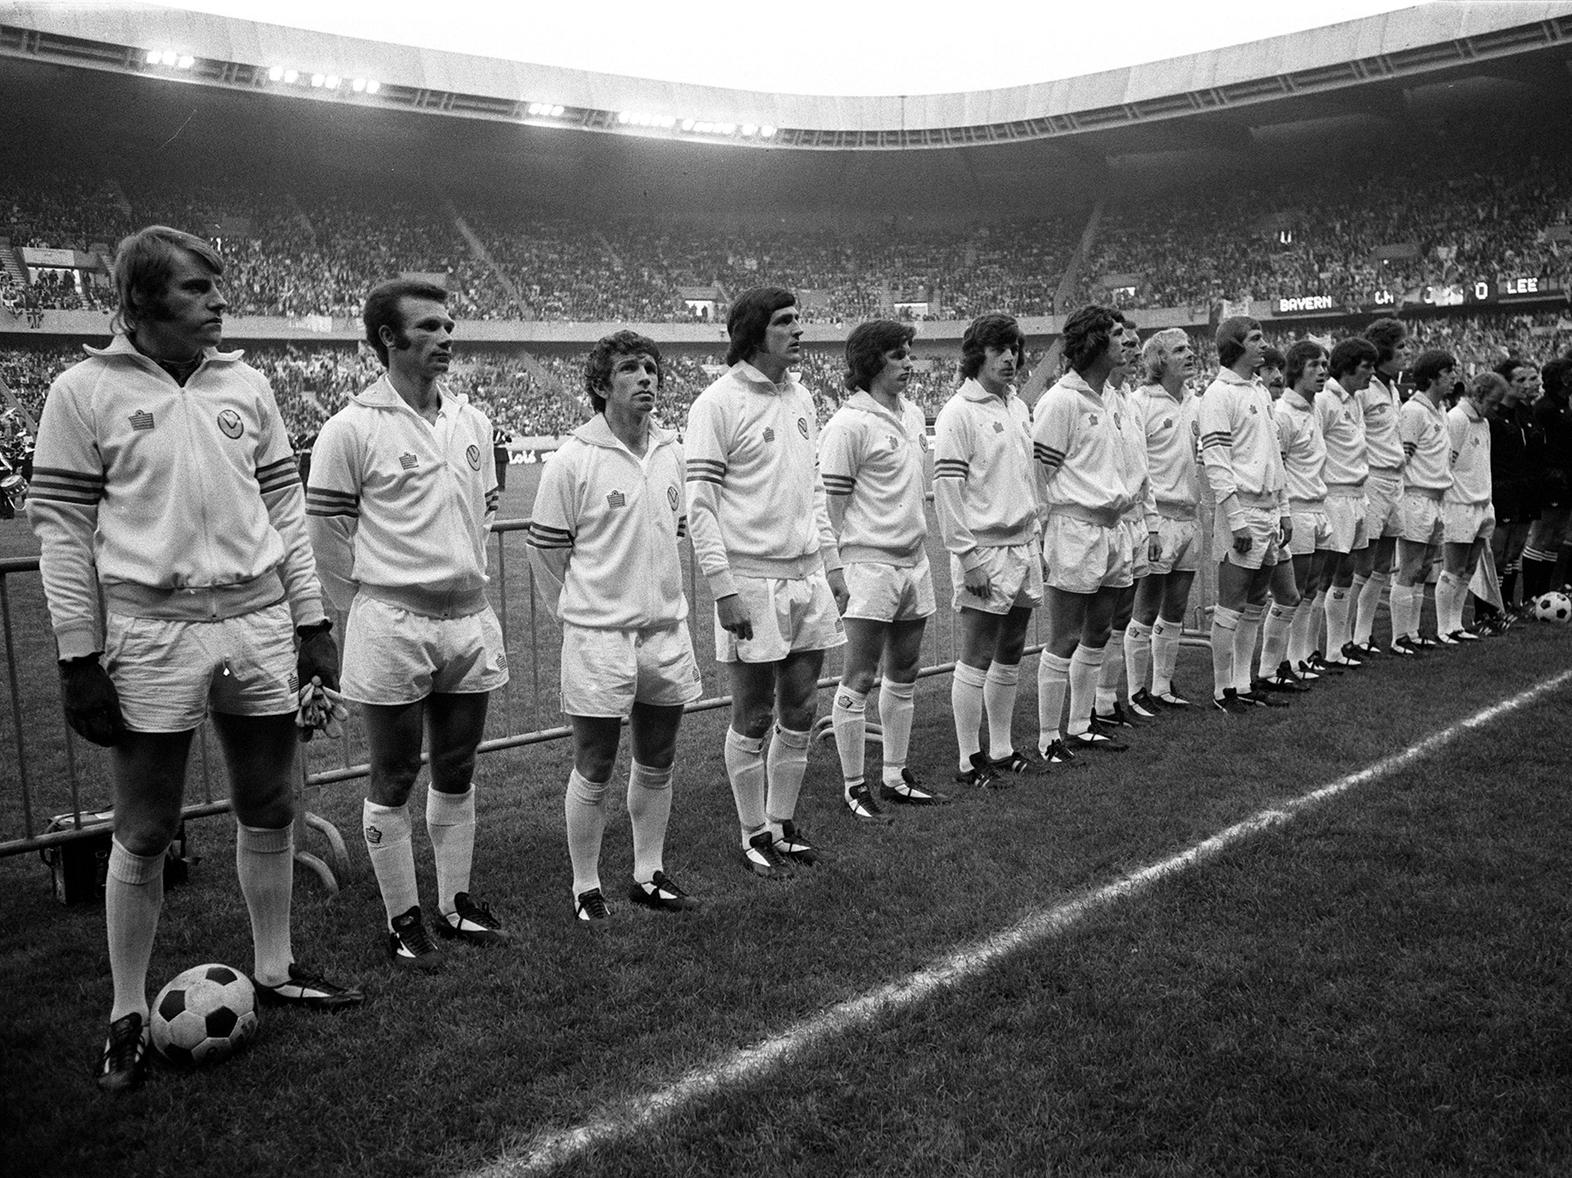 MISERABLE NIGHT: The Leeds United team line up for the 1975 European Cup Final at the Parc des Princes against Bayern Munich, losing 2-0 in controversial circumstances.
Leeds' team (from left): David Stewart, Paul Reaney, John Giles, Norman Hunter, Frank Gray, Peter Lorimer, Joe Jordan, Paul Madeley, Terry Yorath, Allan Clarke, Trevor Cherry, Eddie Gray and Billy Bremner.